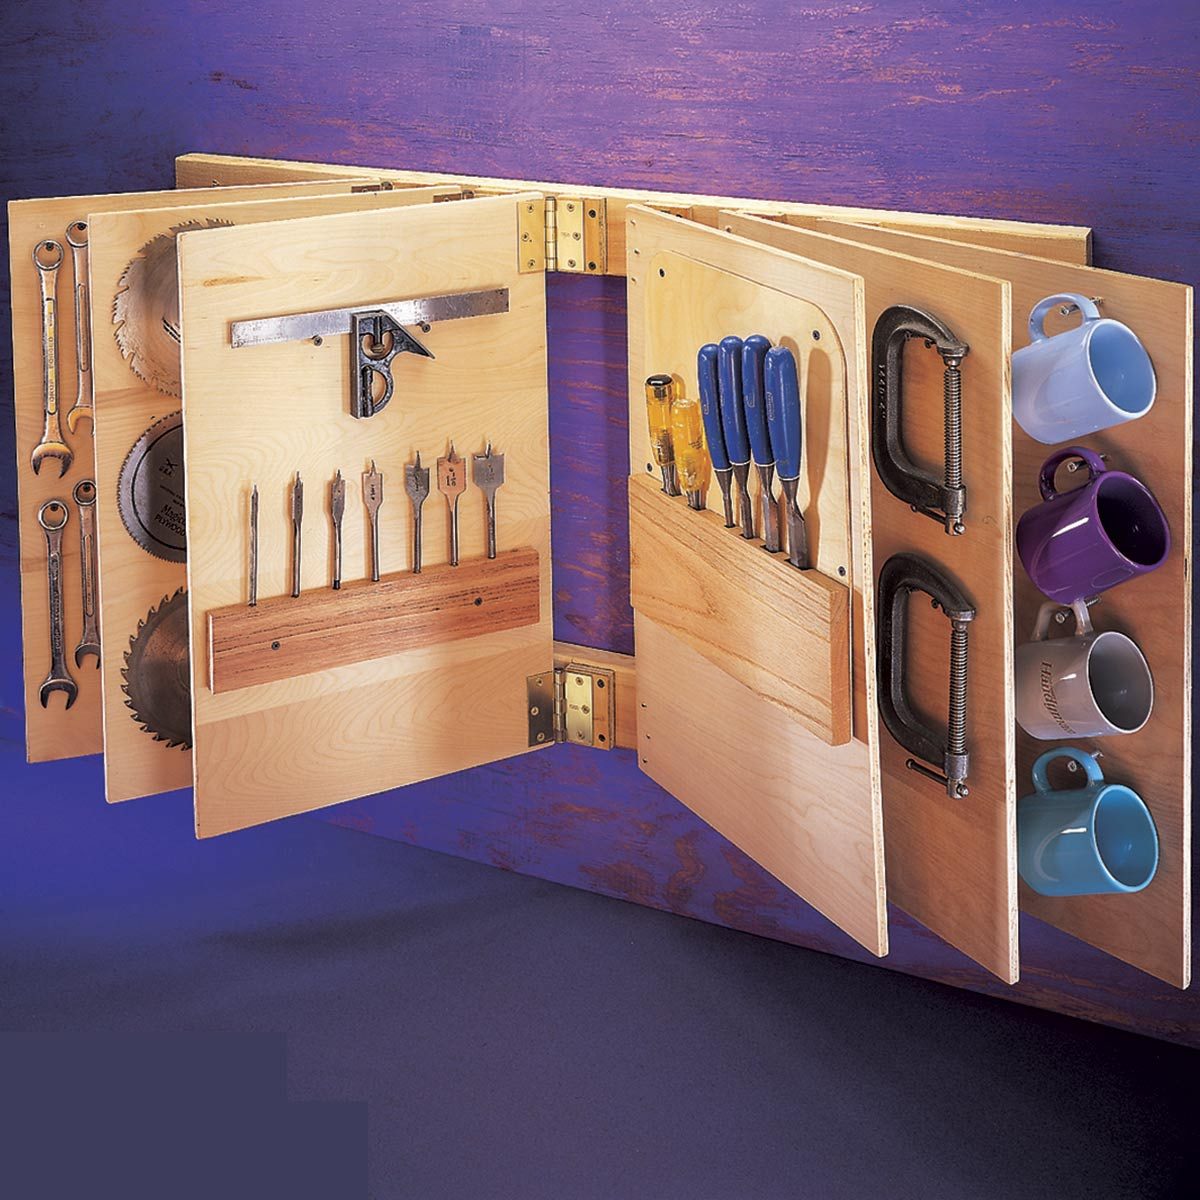 Grab two beyond by BLACK+DECKER toolboxes to organize DIY projects for just  $20.50